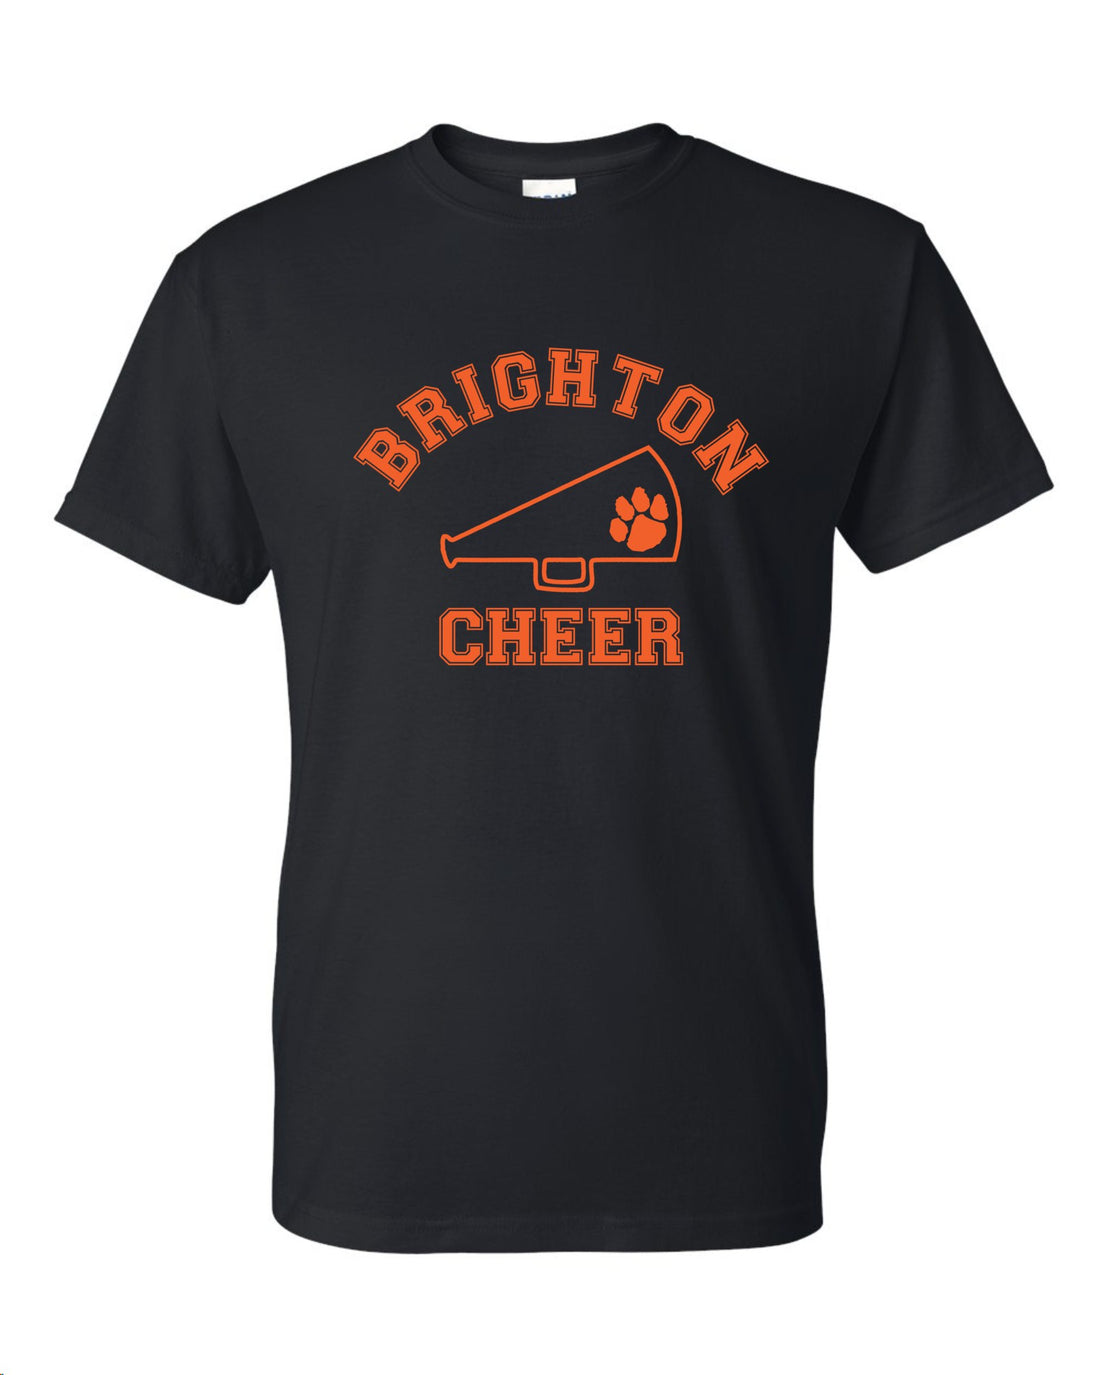 Basic Cheer Tee - PRACTICE APPROVED